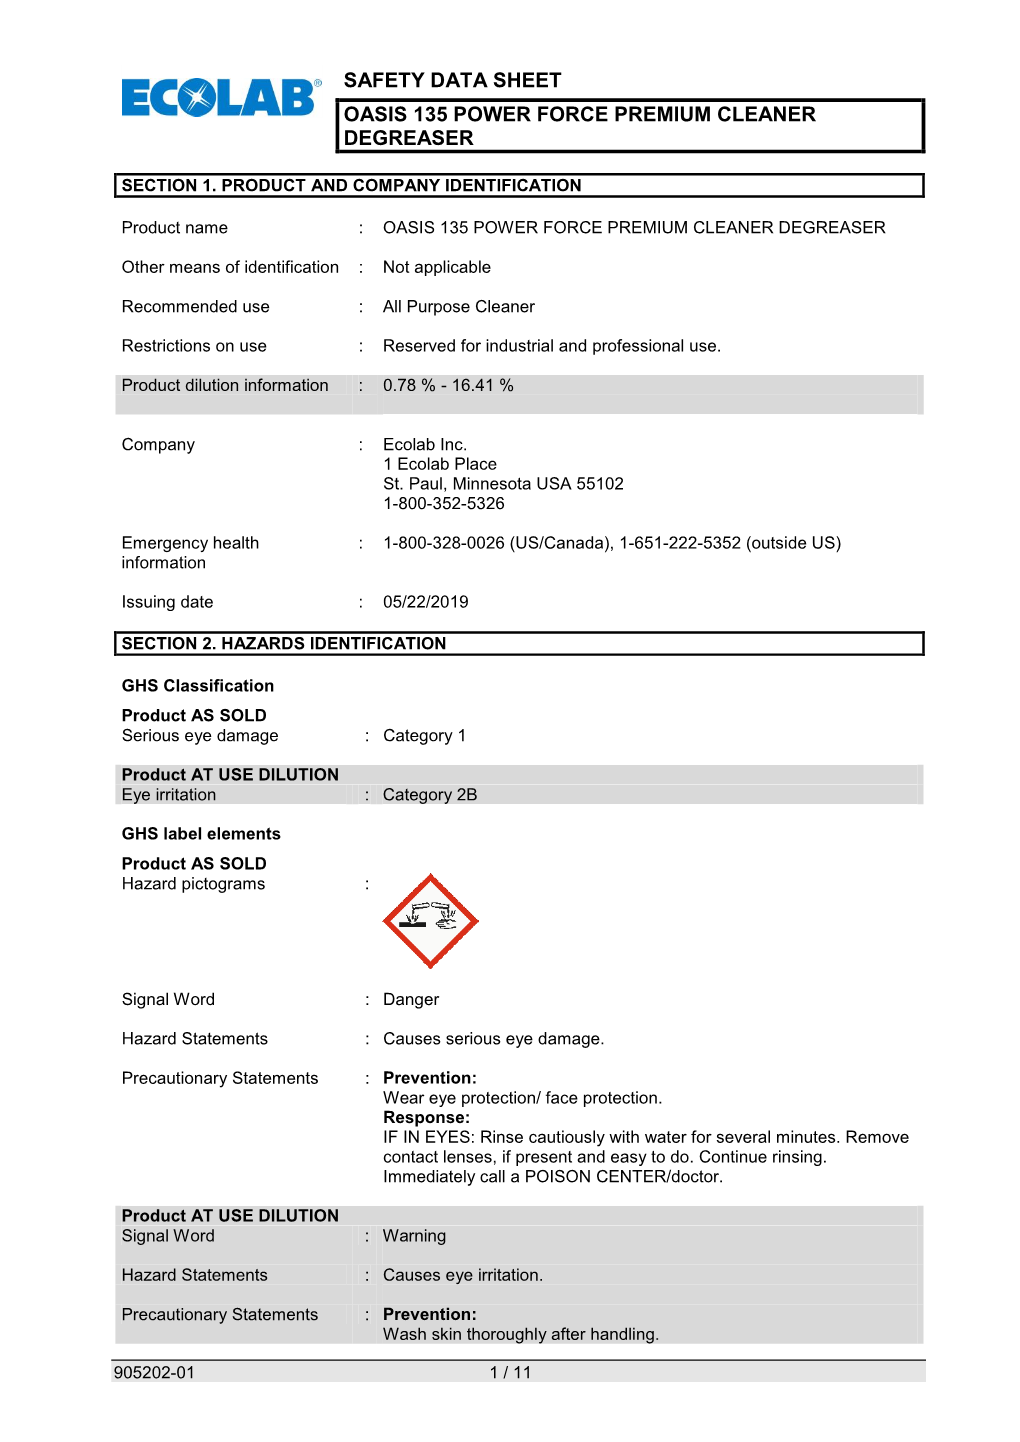 Safety Data Sheet Oasis 135 Power Force Premium Cleaner Degreaser